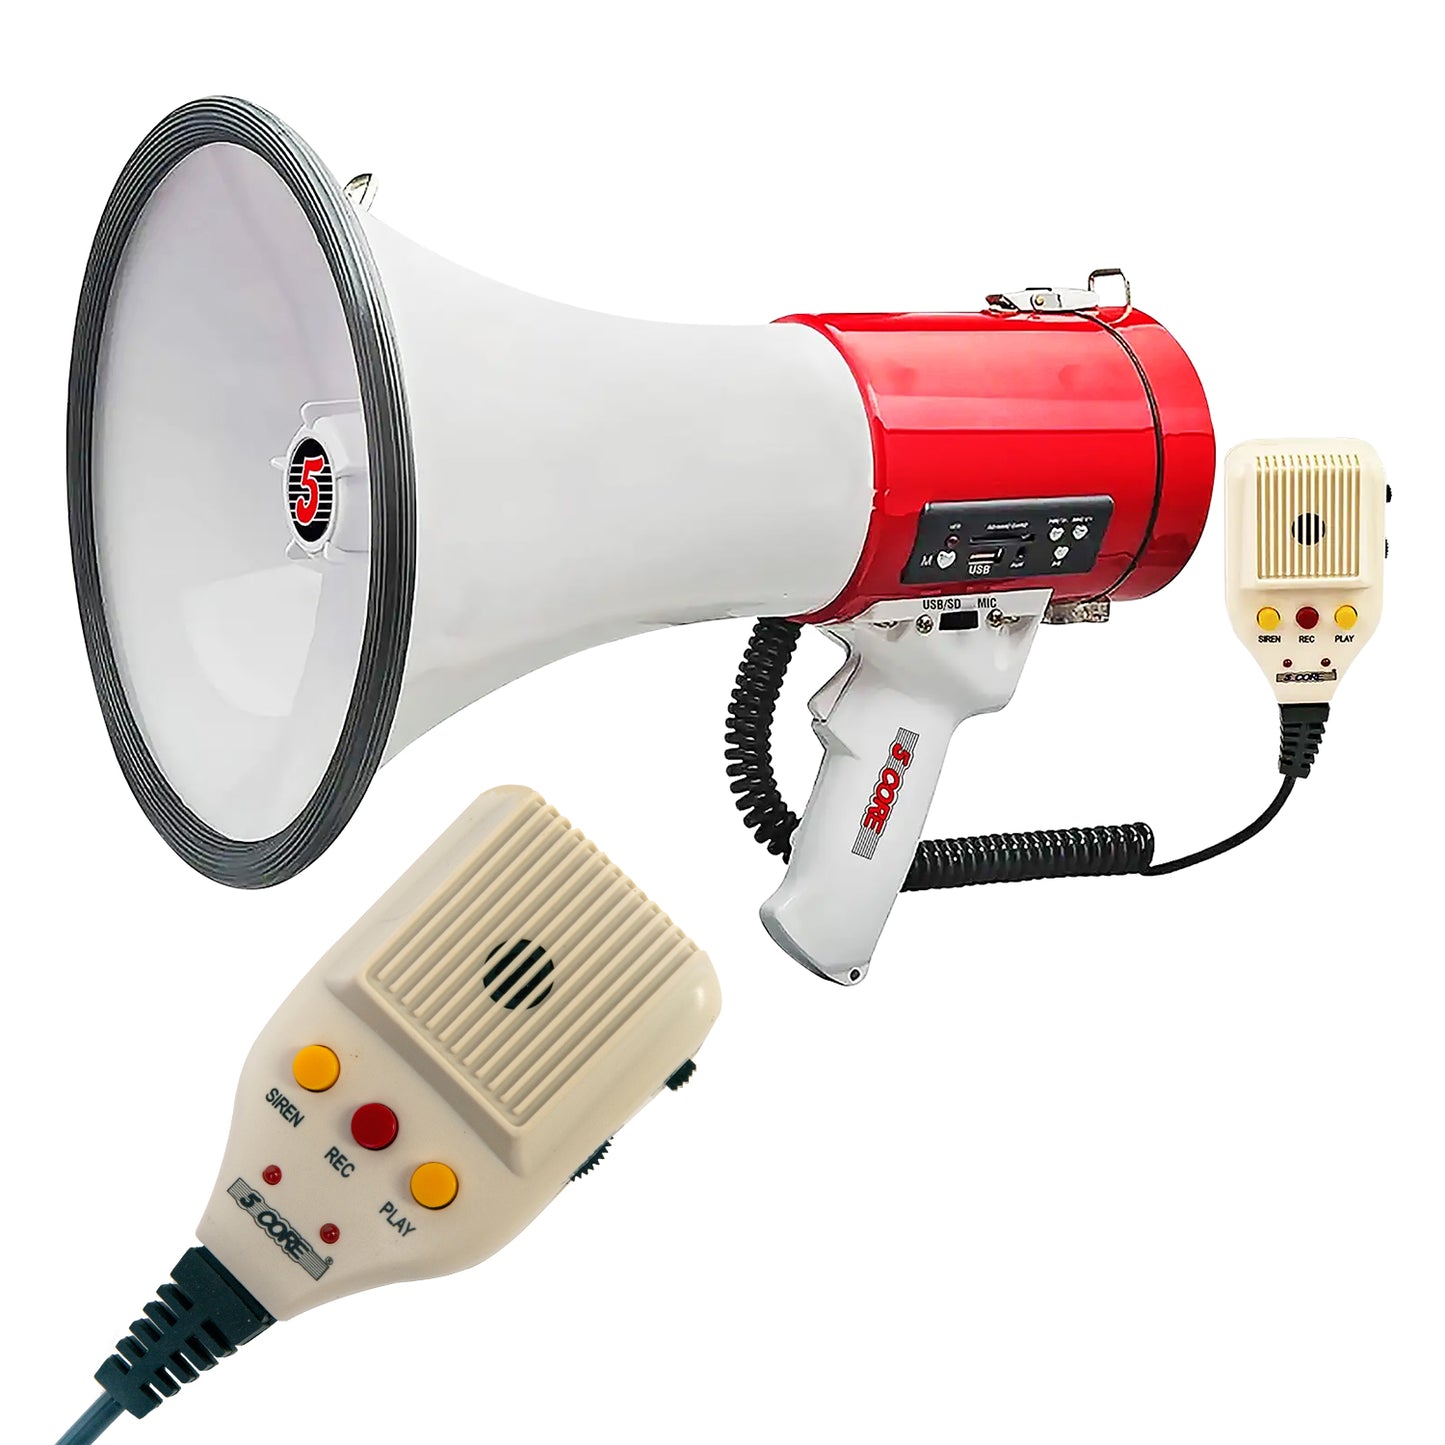 5 Core Megaphone Speaker| 25W Bullhorn Clear & Far Reaching Sound- Multi-Function with REC, Siren, Volume Control |AUX, USB, SD Input| Handheld Mic with ergonomic Grip| for Indoor & Outdoor Use- 66SF